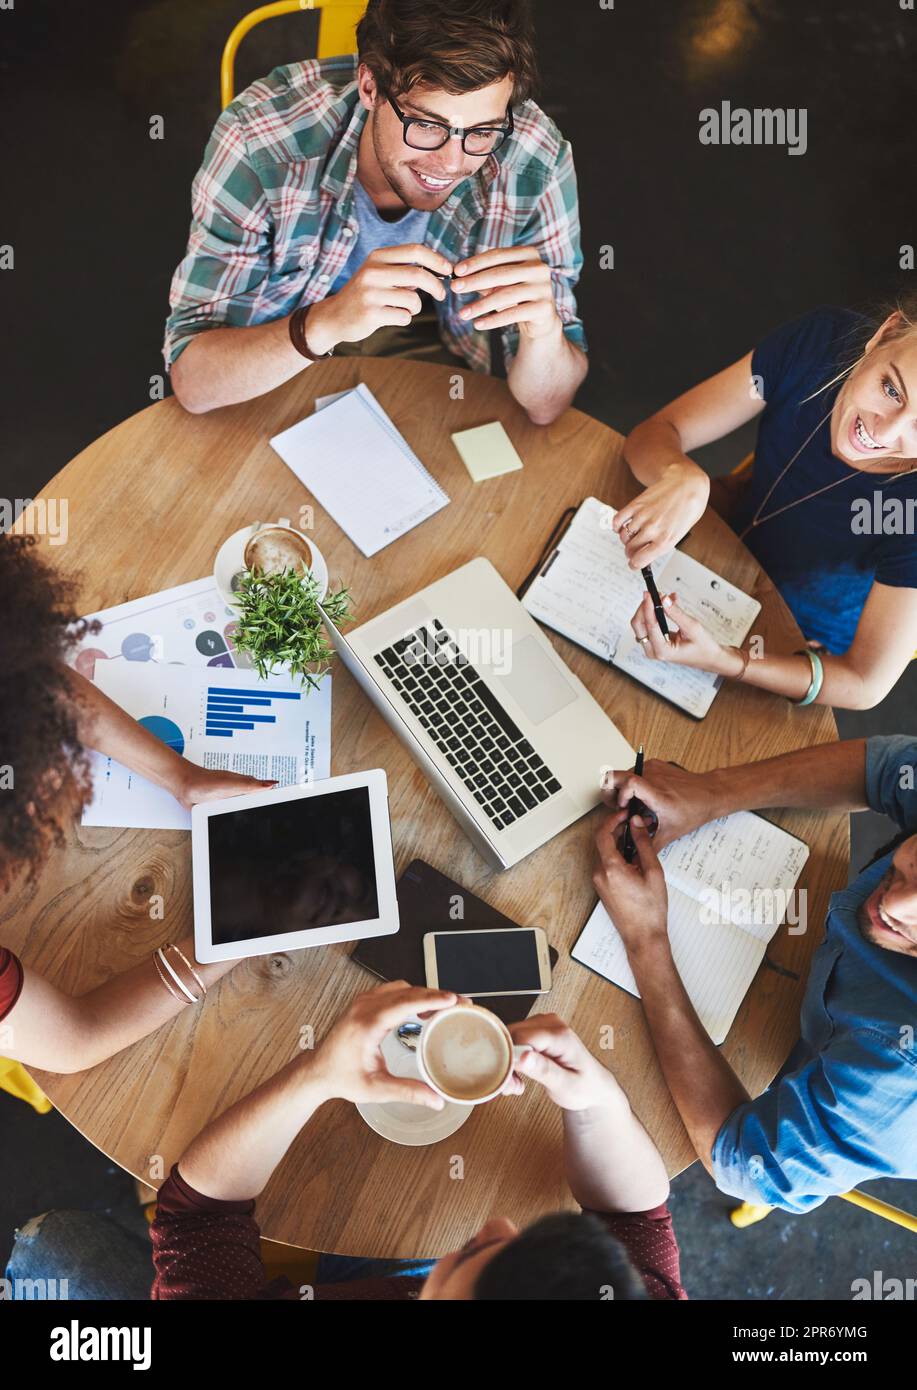 We have all the information we need to pass exams. High angle shot of a group of students studying in a coffee shop. Stock Photo